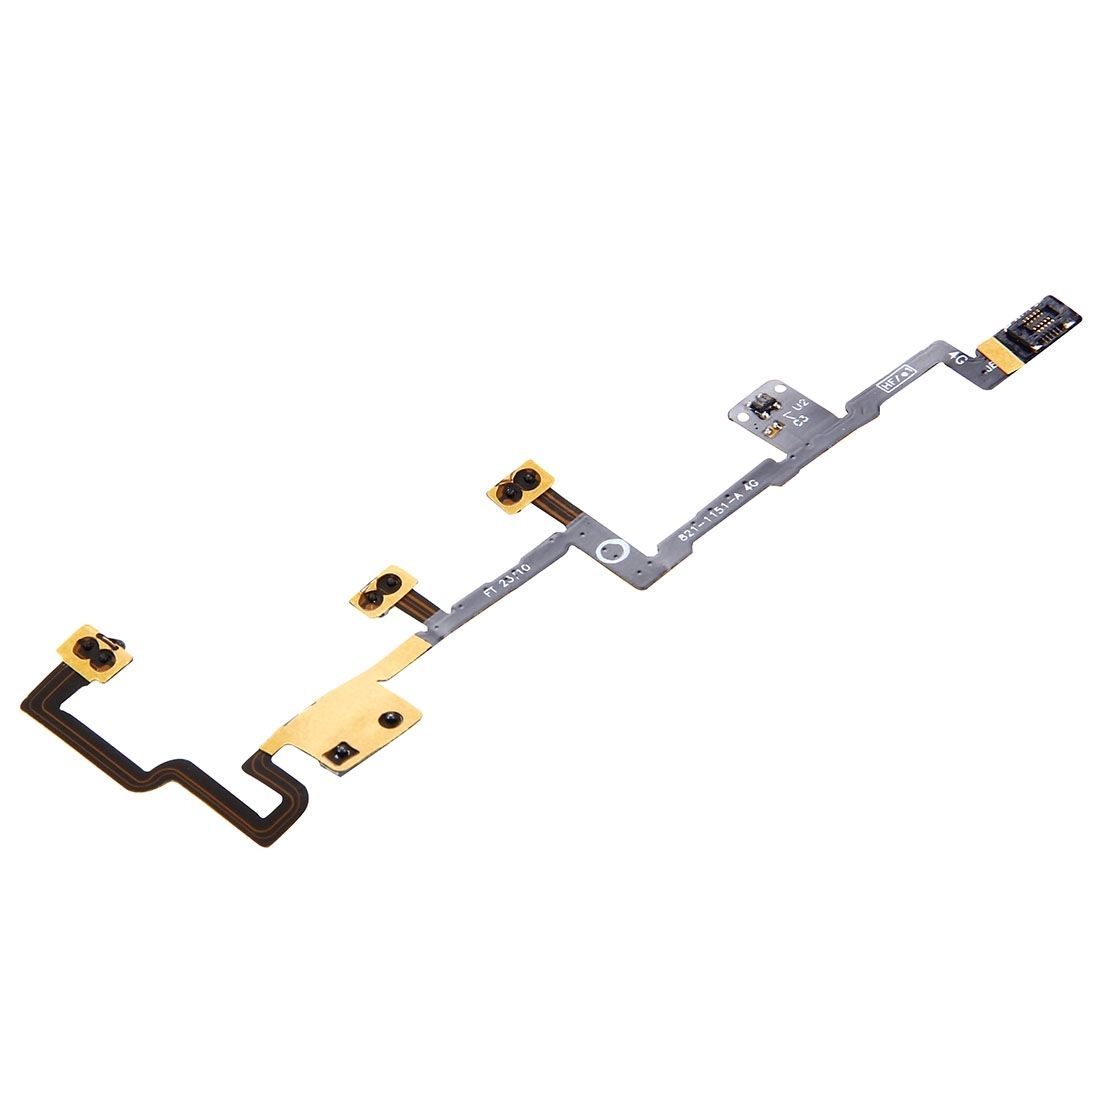 Apple iPad 2 - Power On/Off Volume Buttons Flex Cable for [product_price] - First Help Tech